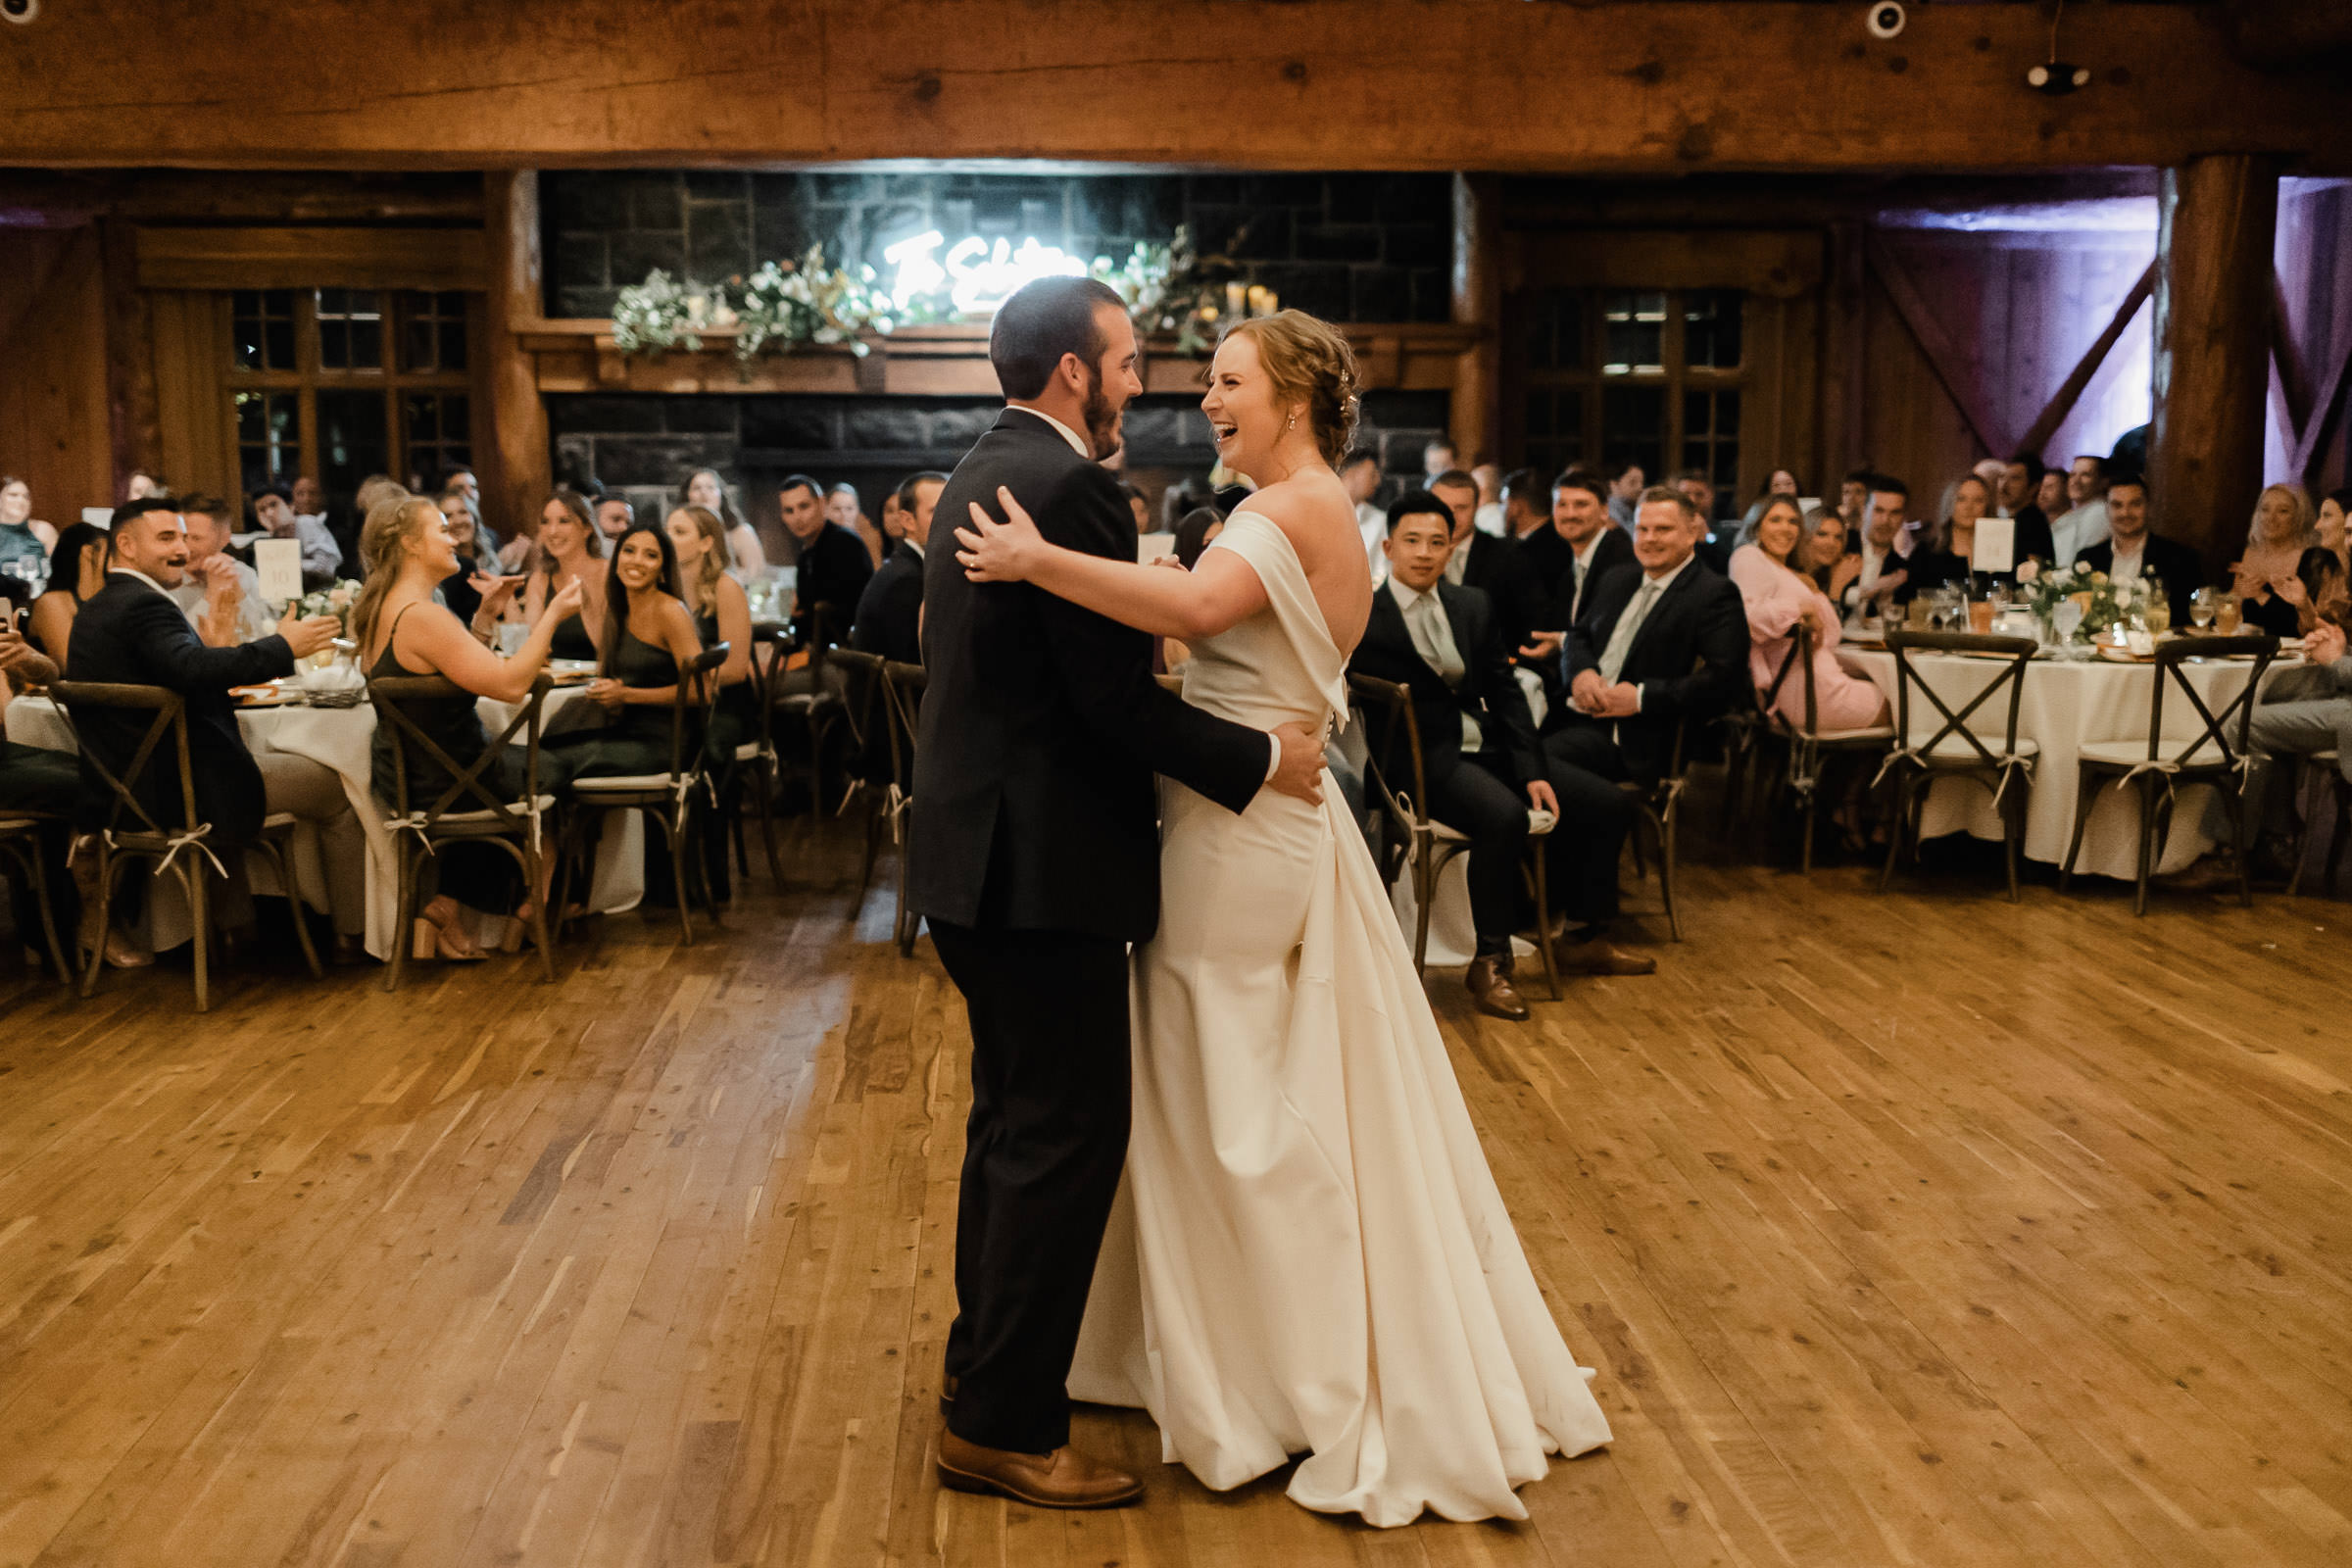 Bride and groom share their first dance at Sunriver Resort's Great Hall